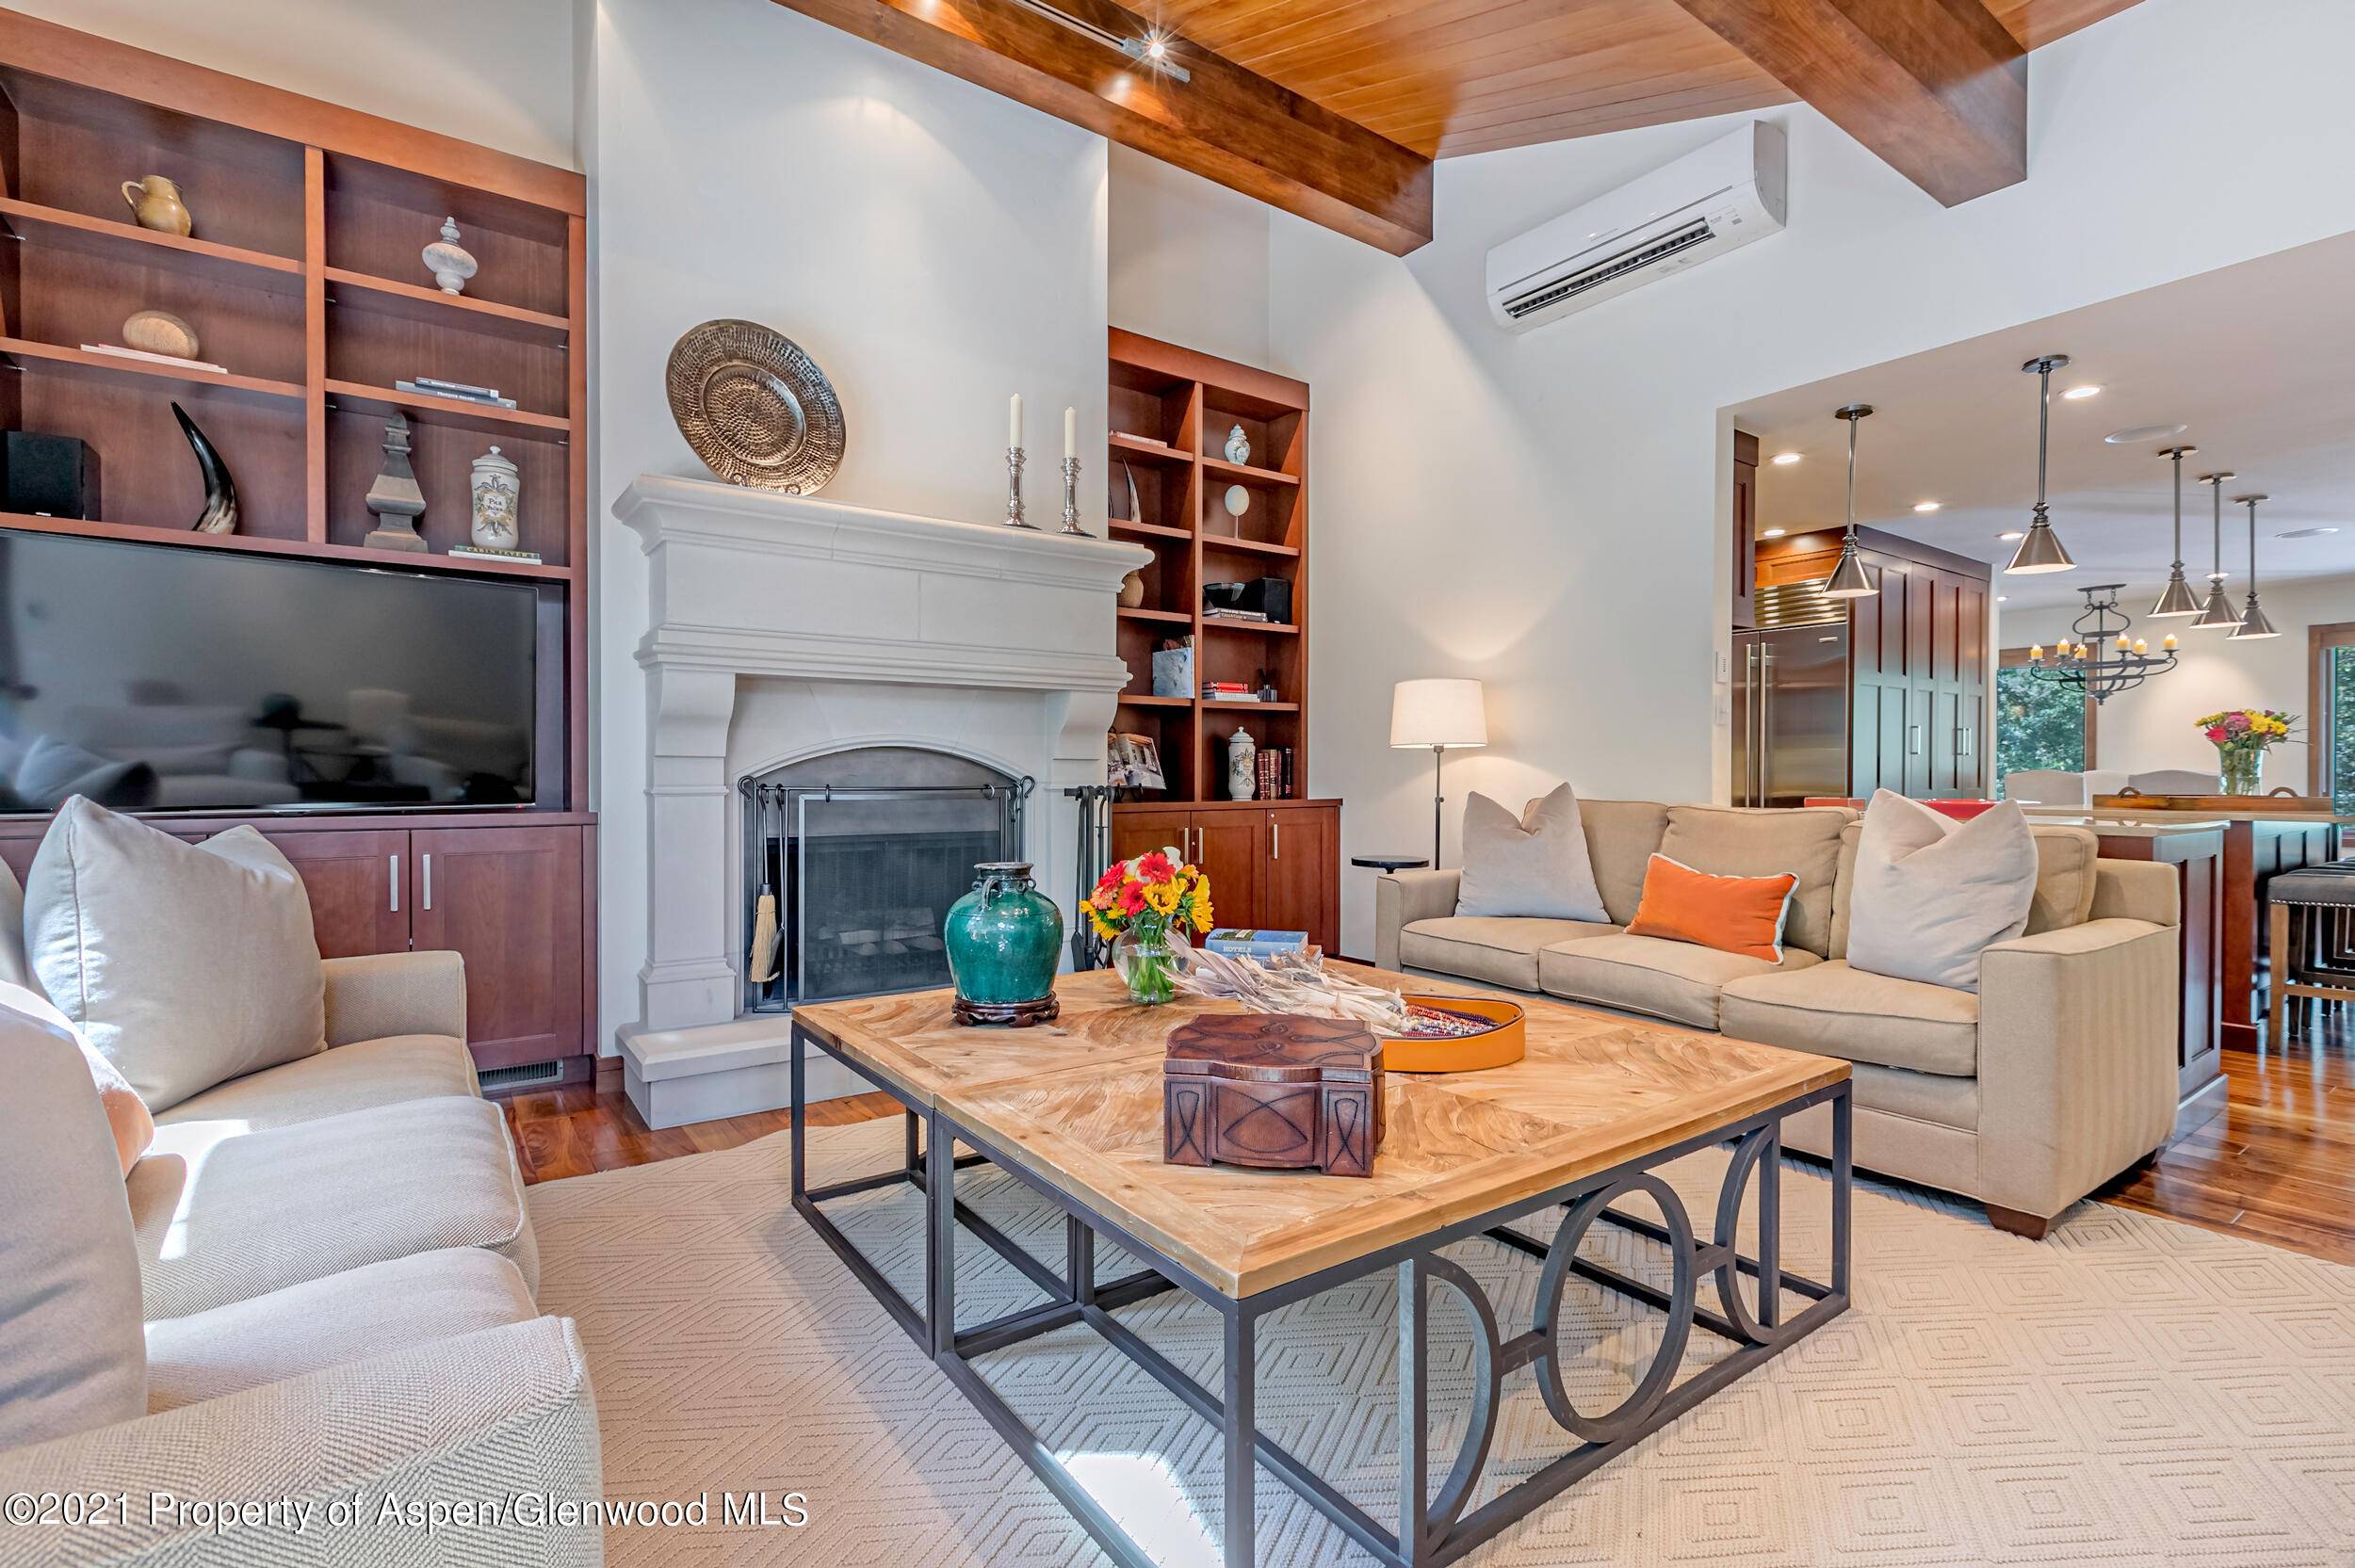 STR PERMIT 084474 This gracious, contemporary, end unit townhome with three levels of beautiful walnut floors and cabinetry throughout is located just two blocks to the slopes as well as ...